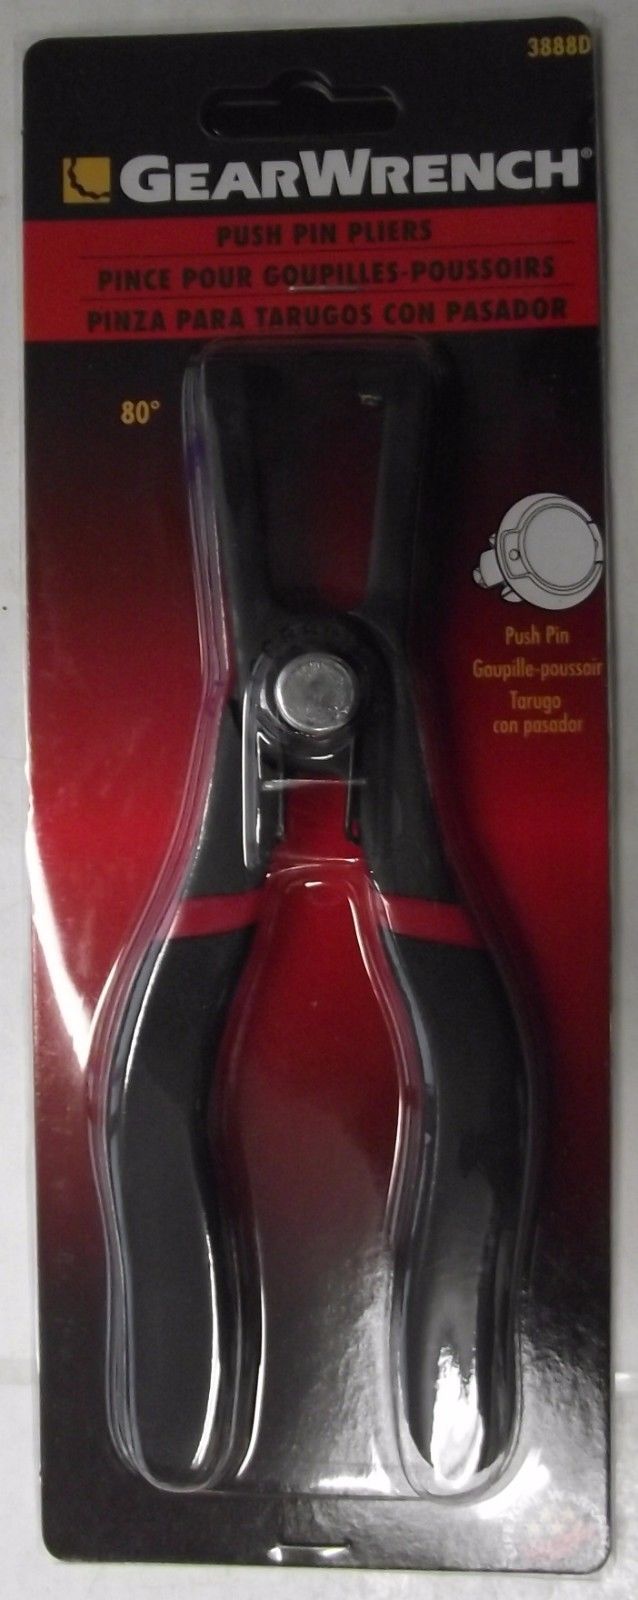 GearWrench 3888D Push Pin Pliers 80 Degree Offset